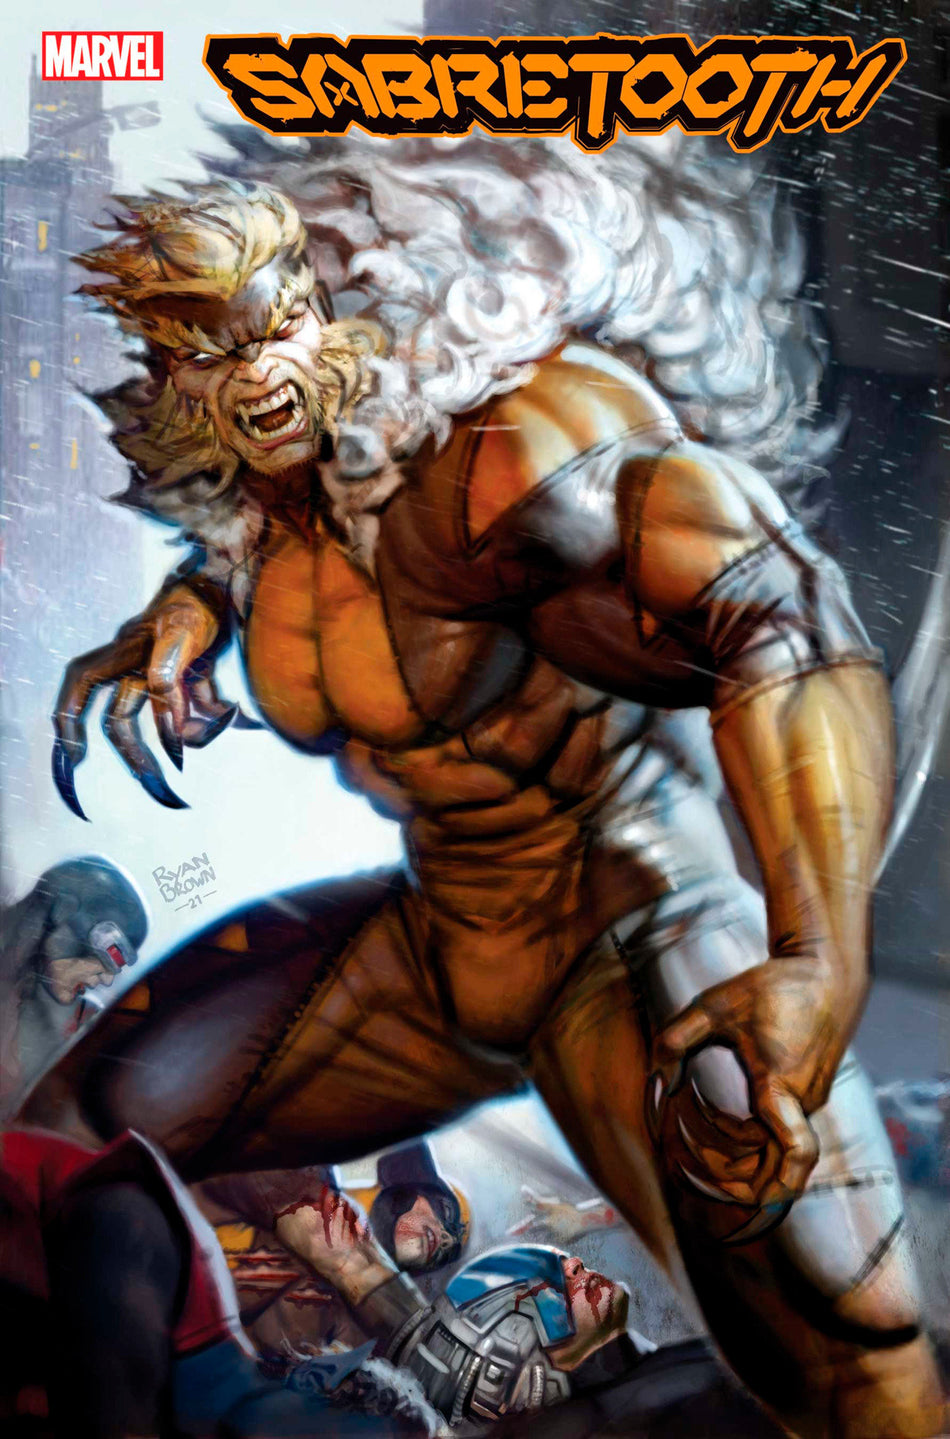 Image of Sabretooth 1 Brown Variant comic sold by Stronghold Collectibles.